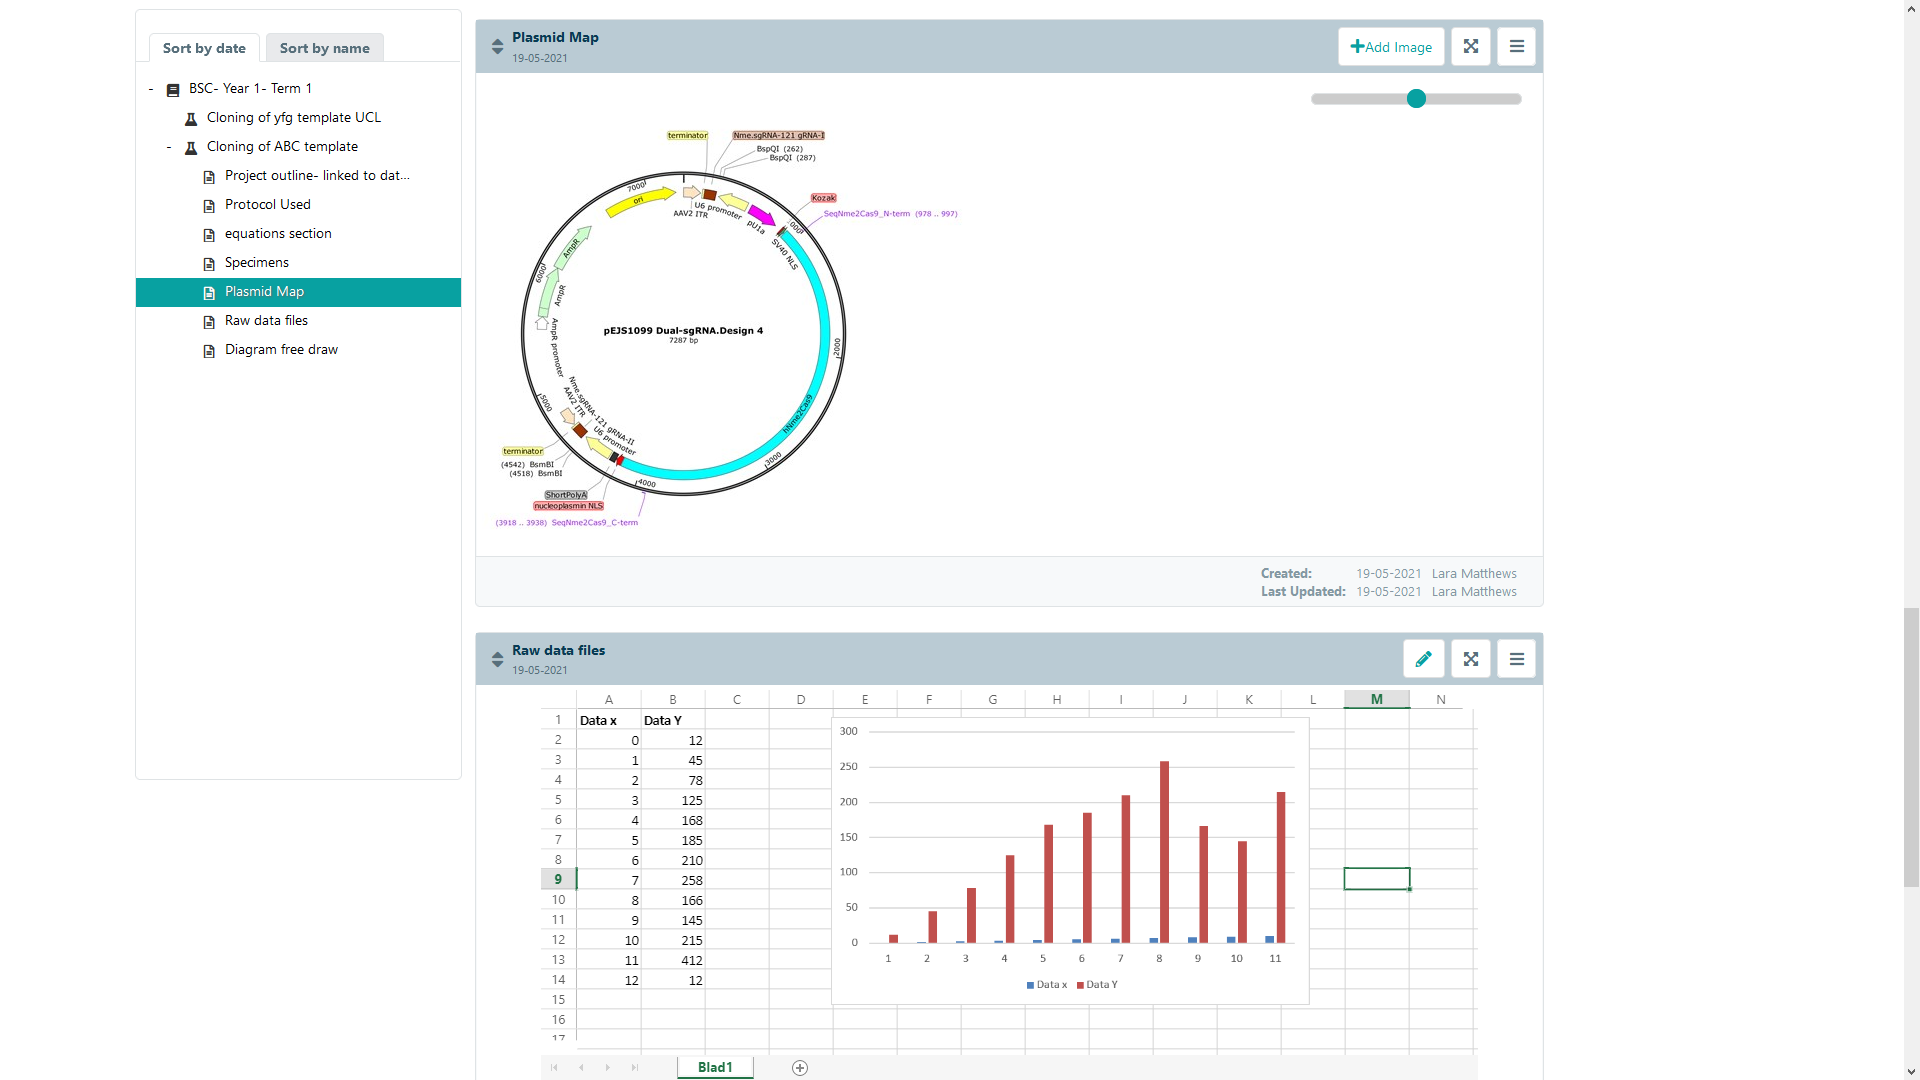 Attach a Plasmid map in reports